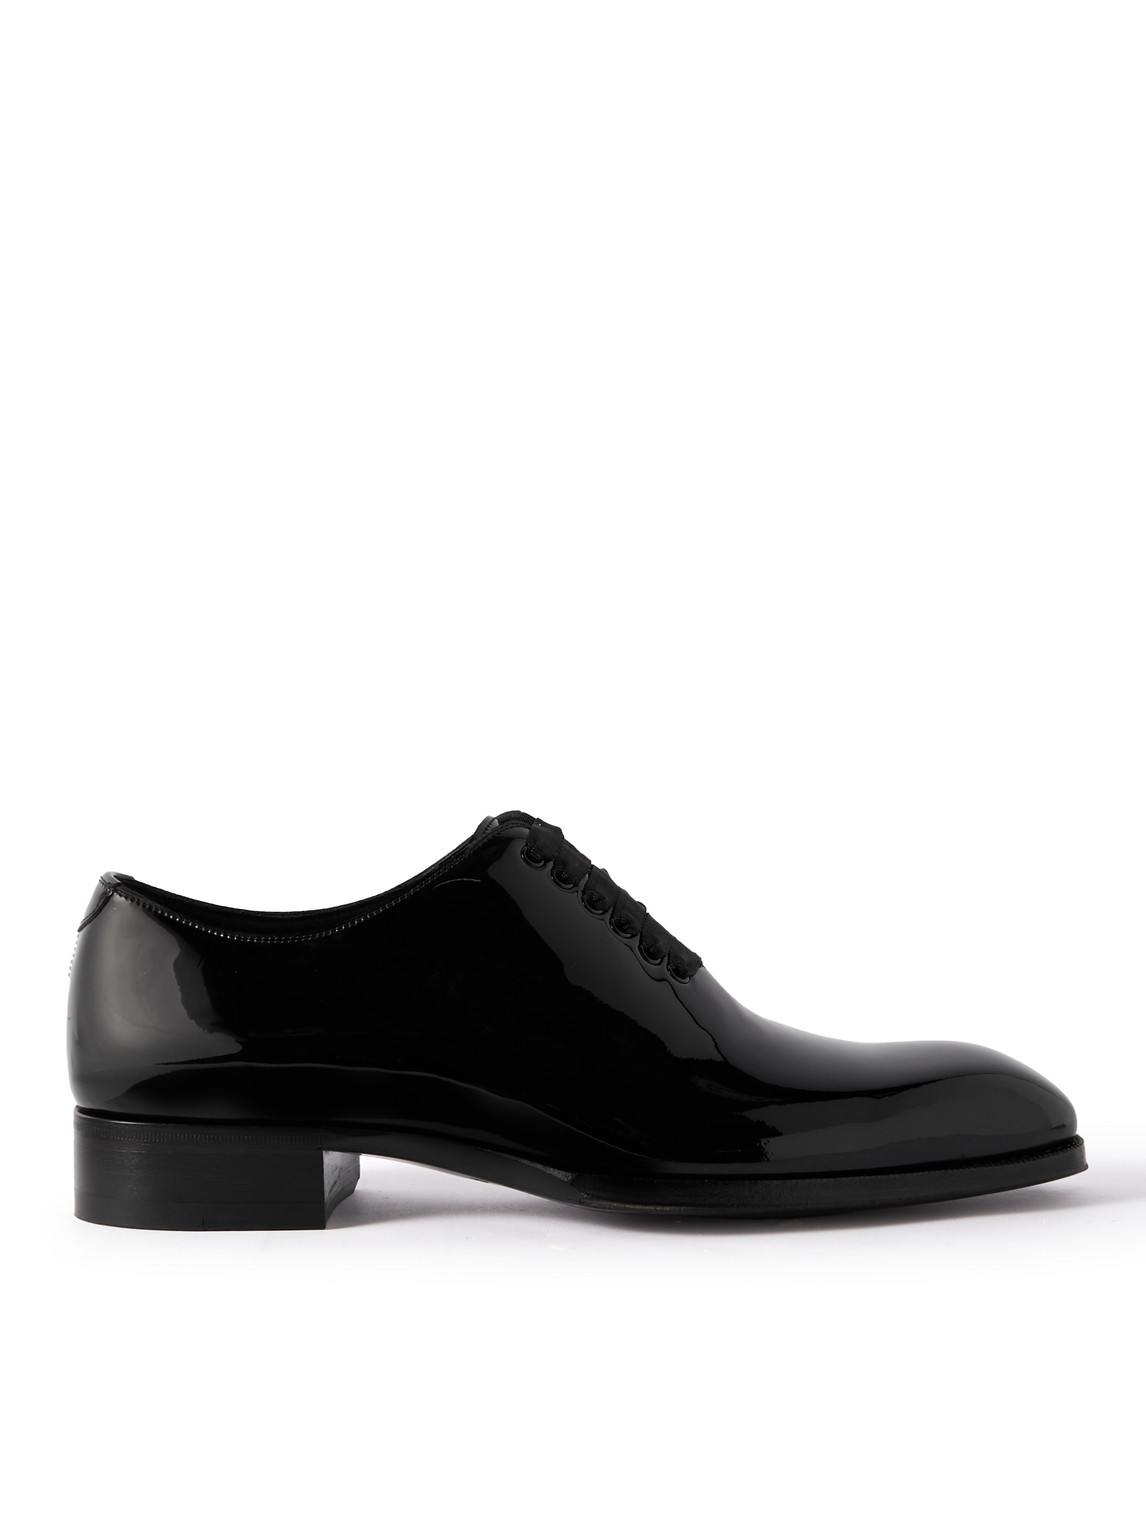 Tom Ford Elkan Whole-cut Patent-leather Oxford Shoes In Black